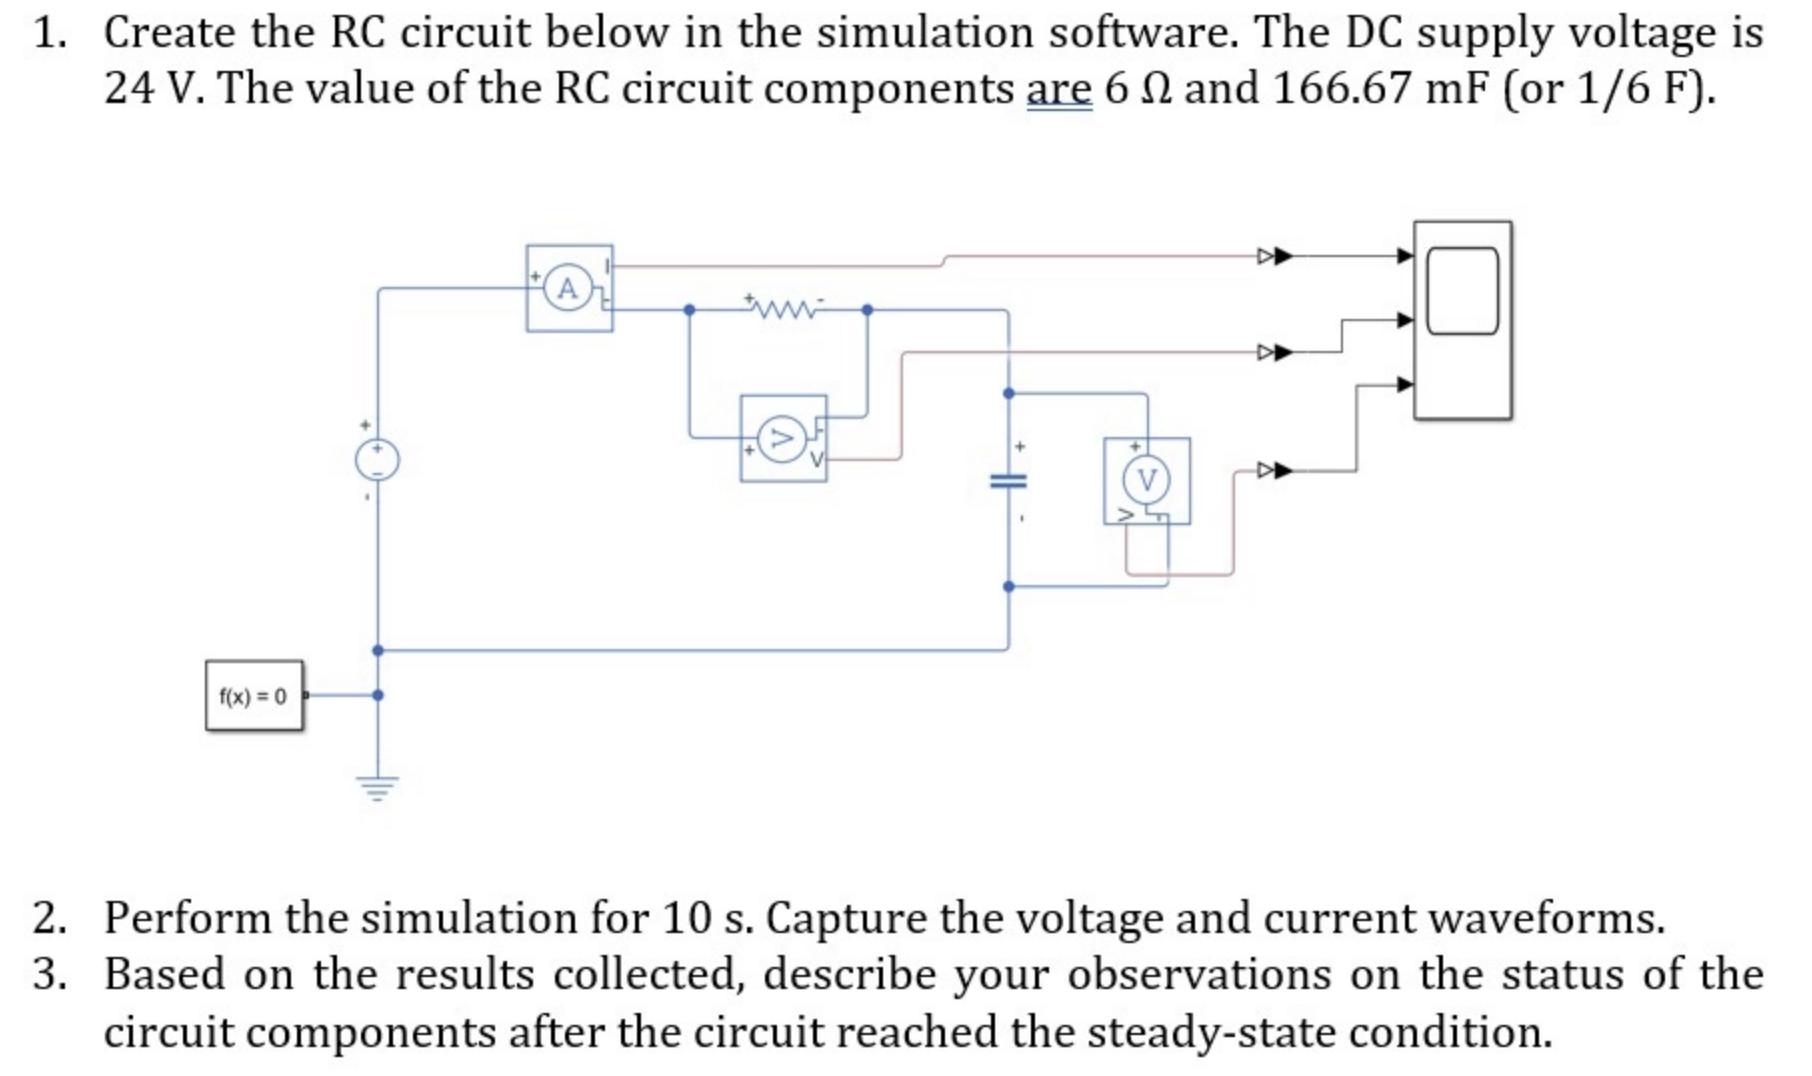 1. Create the RC circuit below in the simulation software. The DC supply voltage is 24 V. The value of the RC